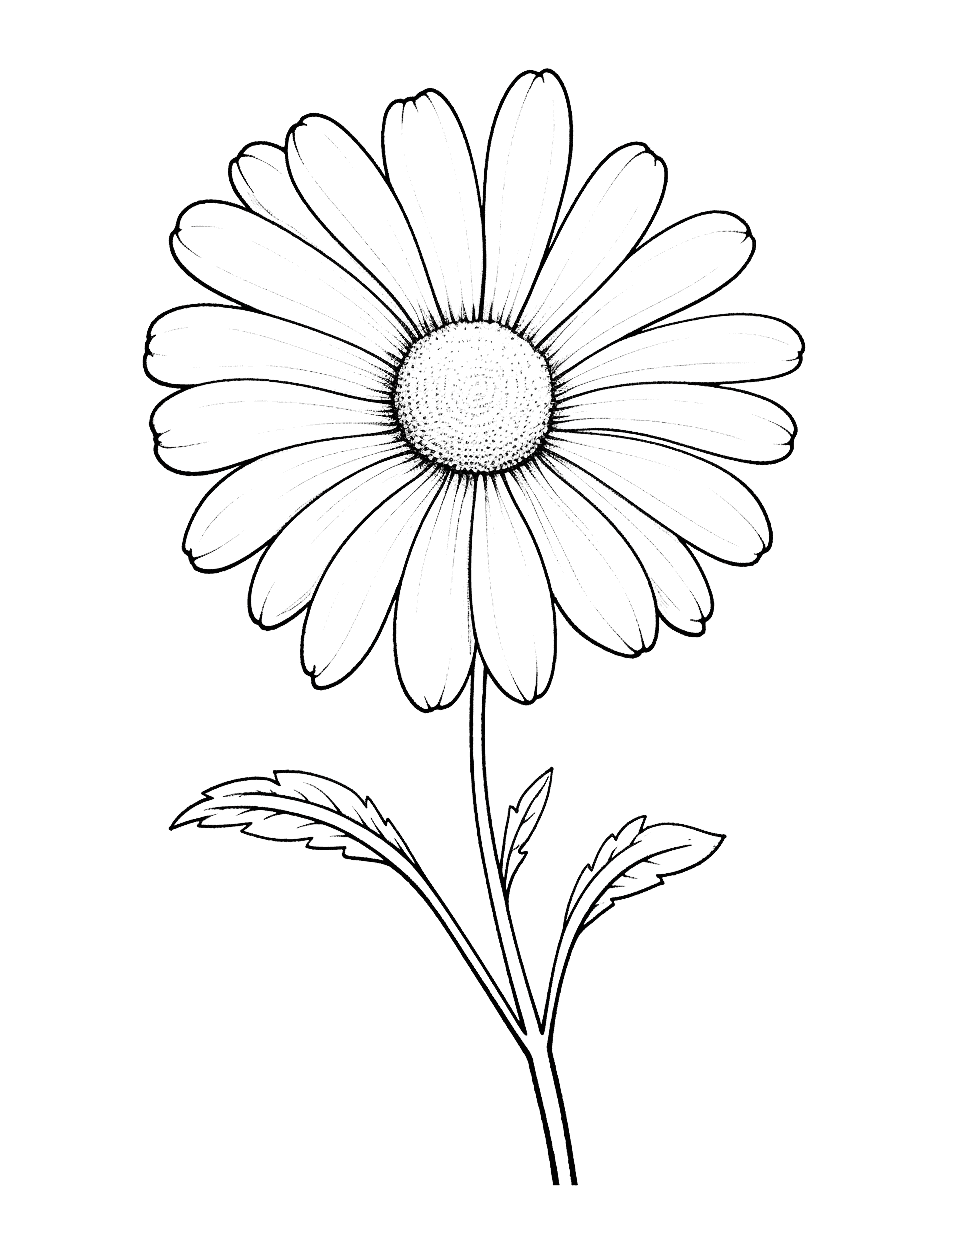 Realistic Daisy for Advanced Colorists Flower Coloring Page - A coloring page featuring a detailed, realistic daisy.